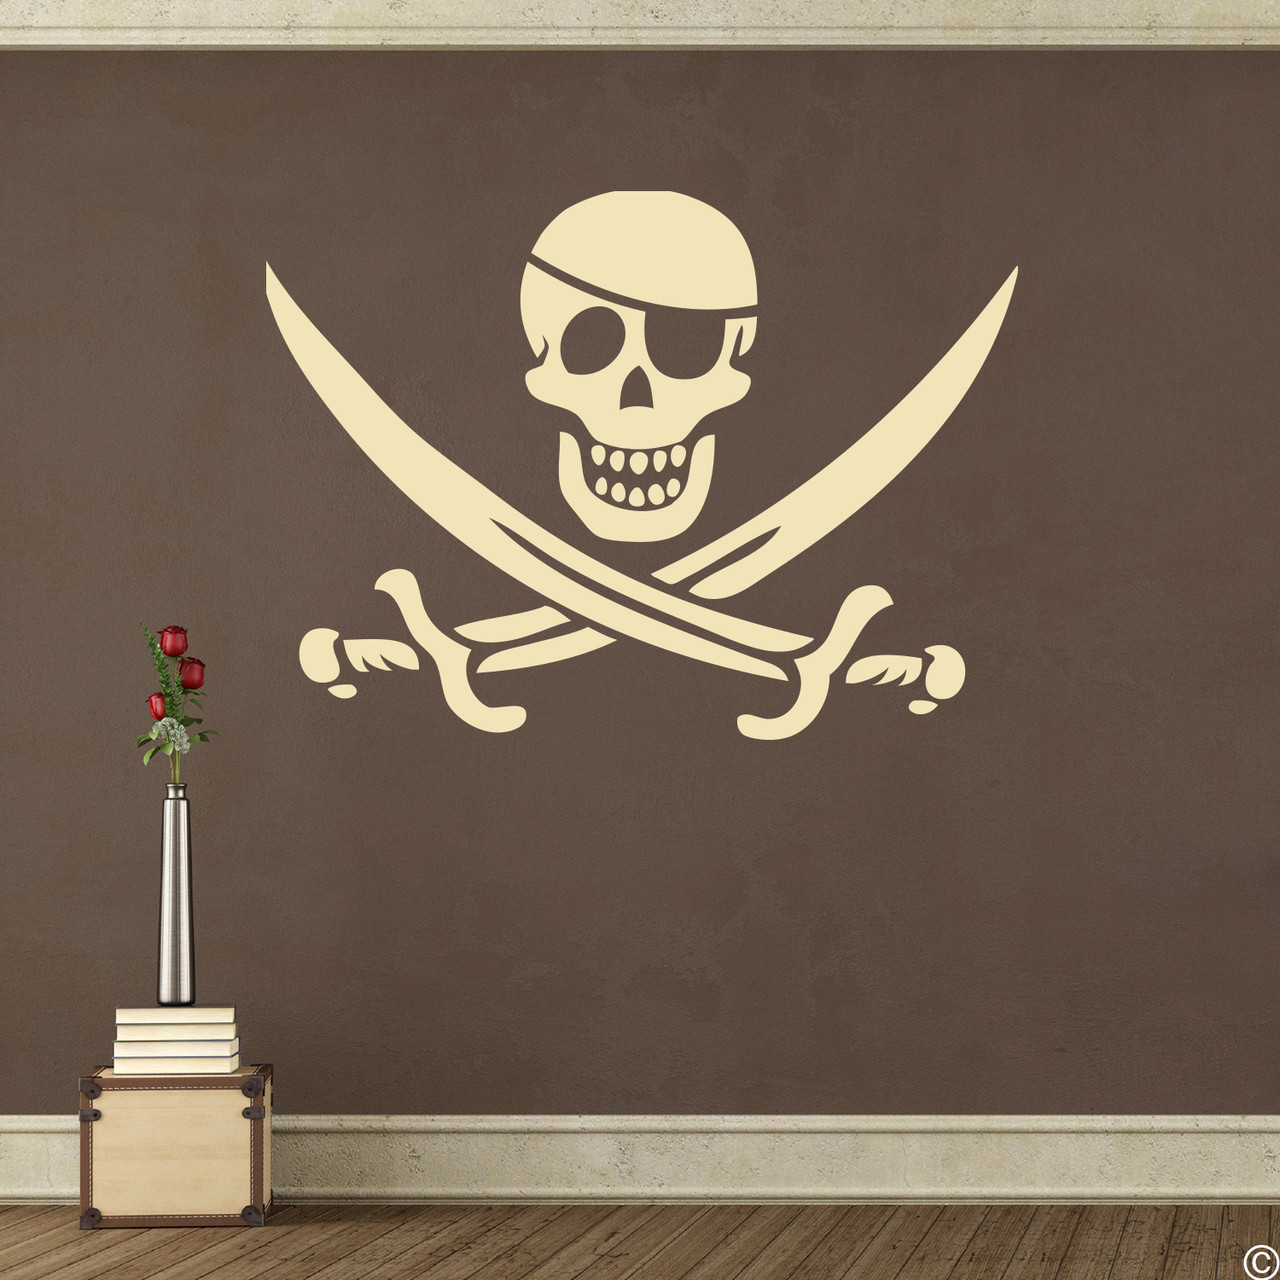 Eye patch jolly roger pirate vinyl wall decal in beige